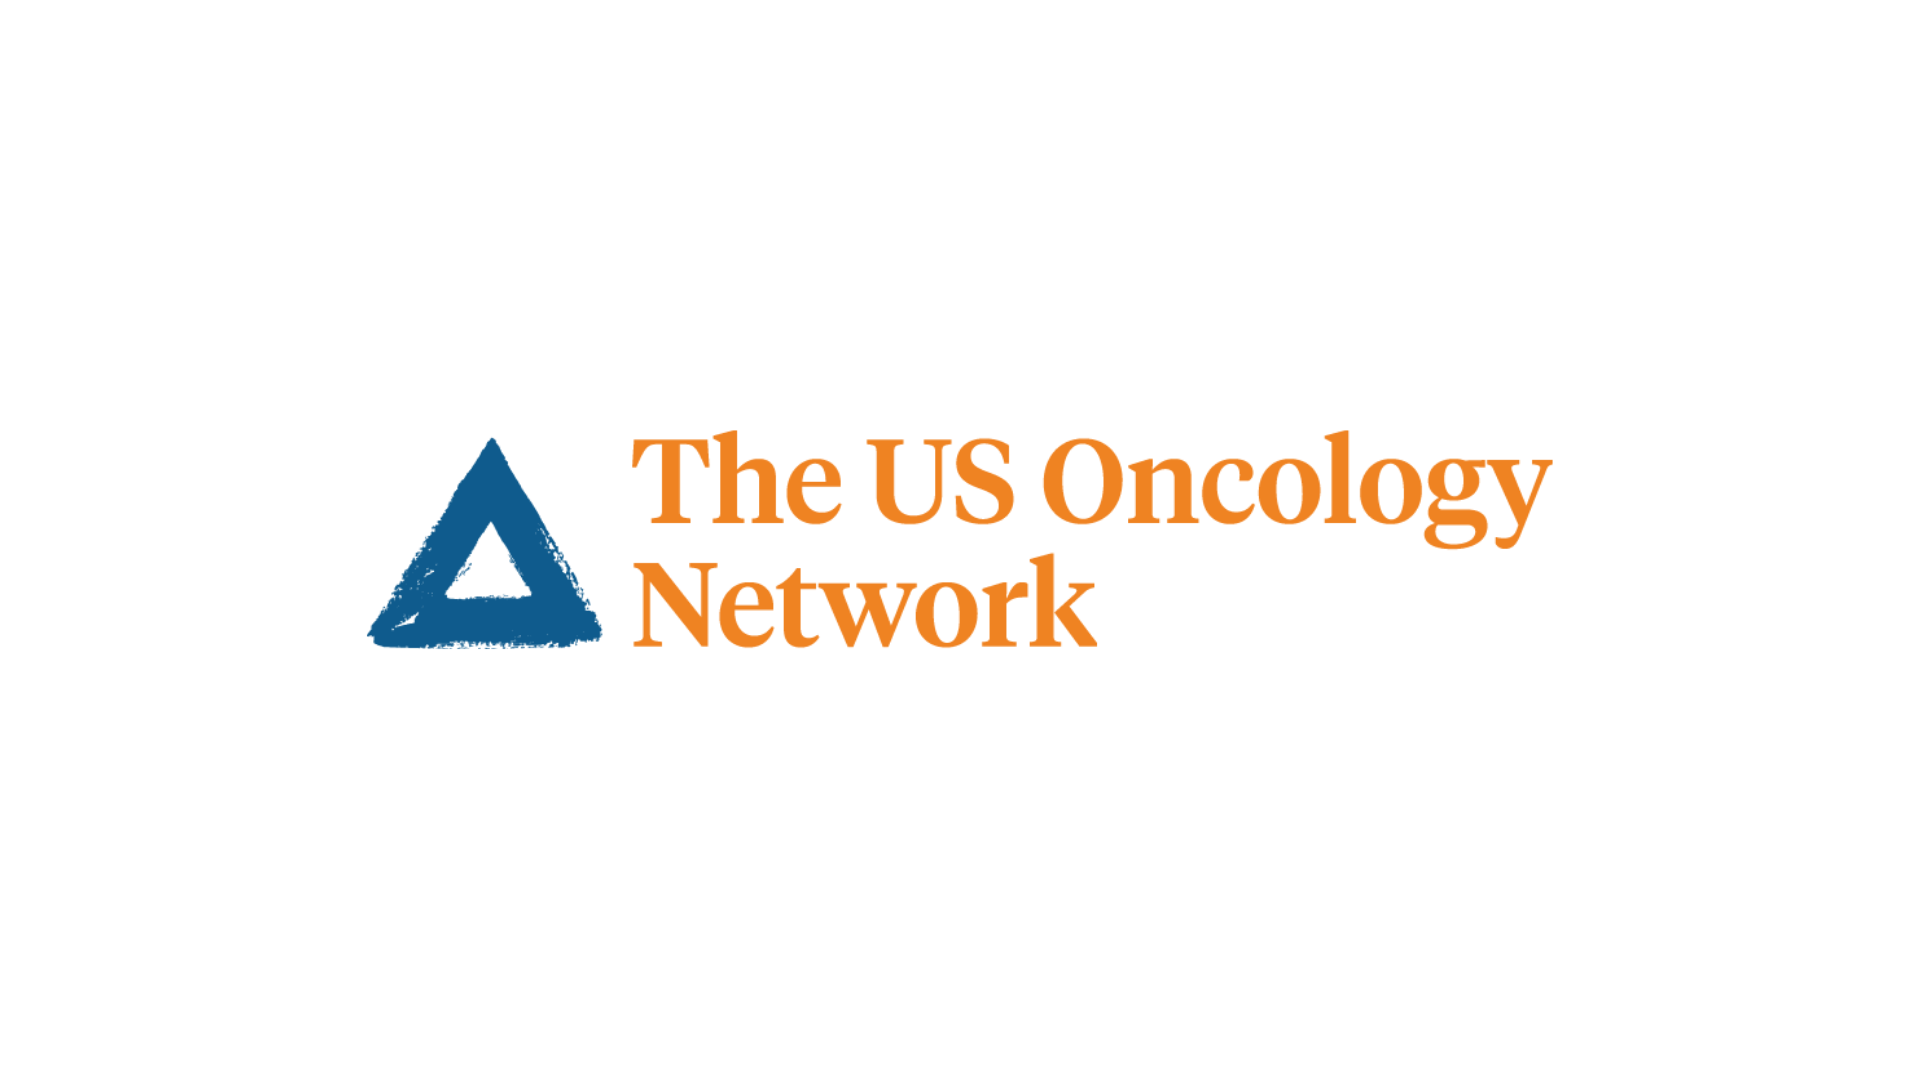 The US Oncology Network Extends Its Reach into Tennessee with The Addition of Nashville Oncology Associates